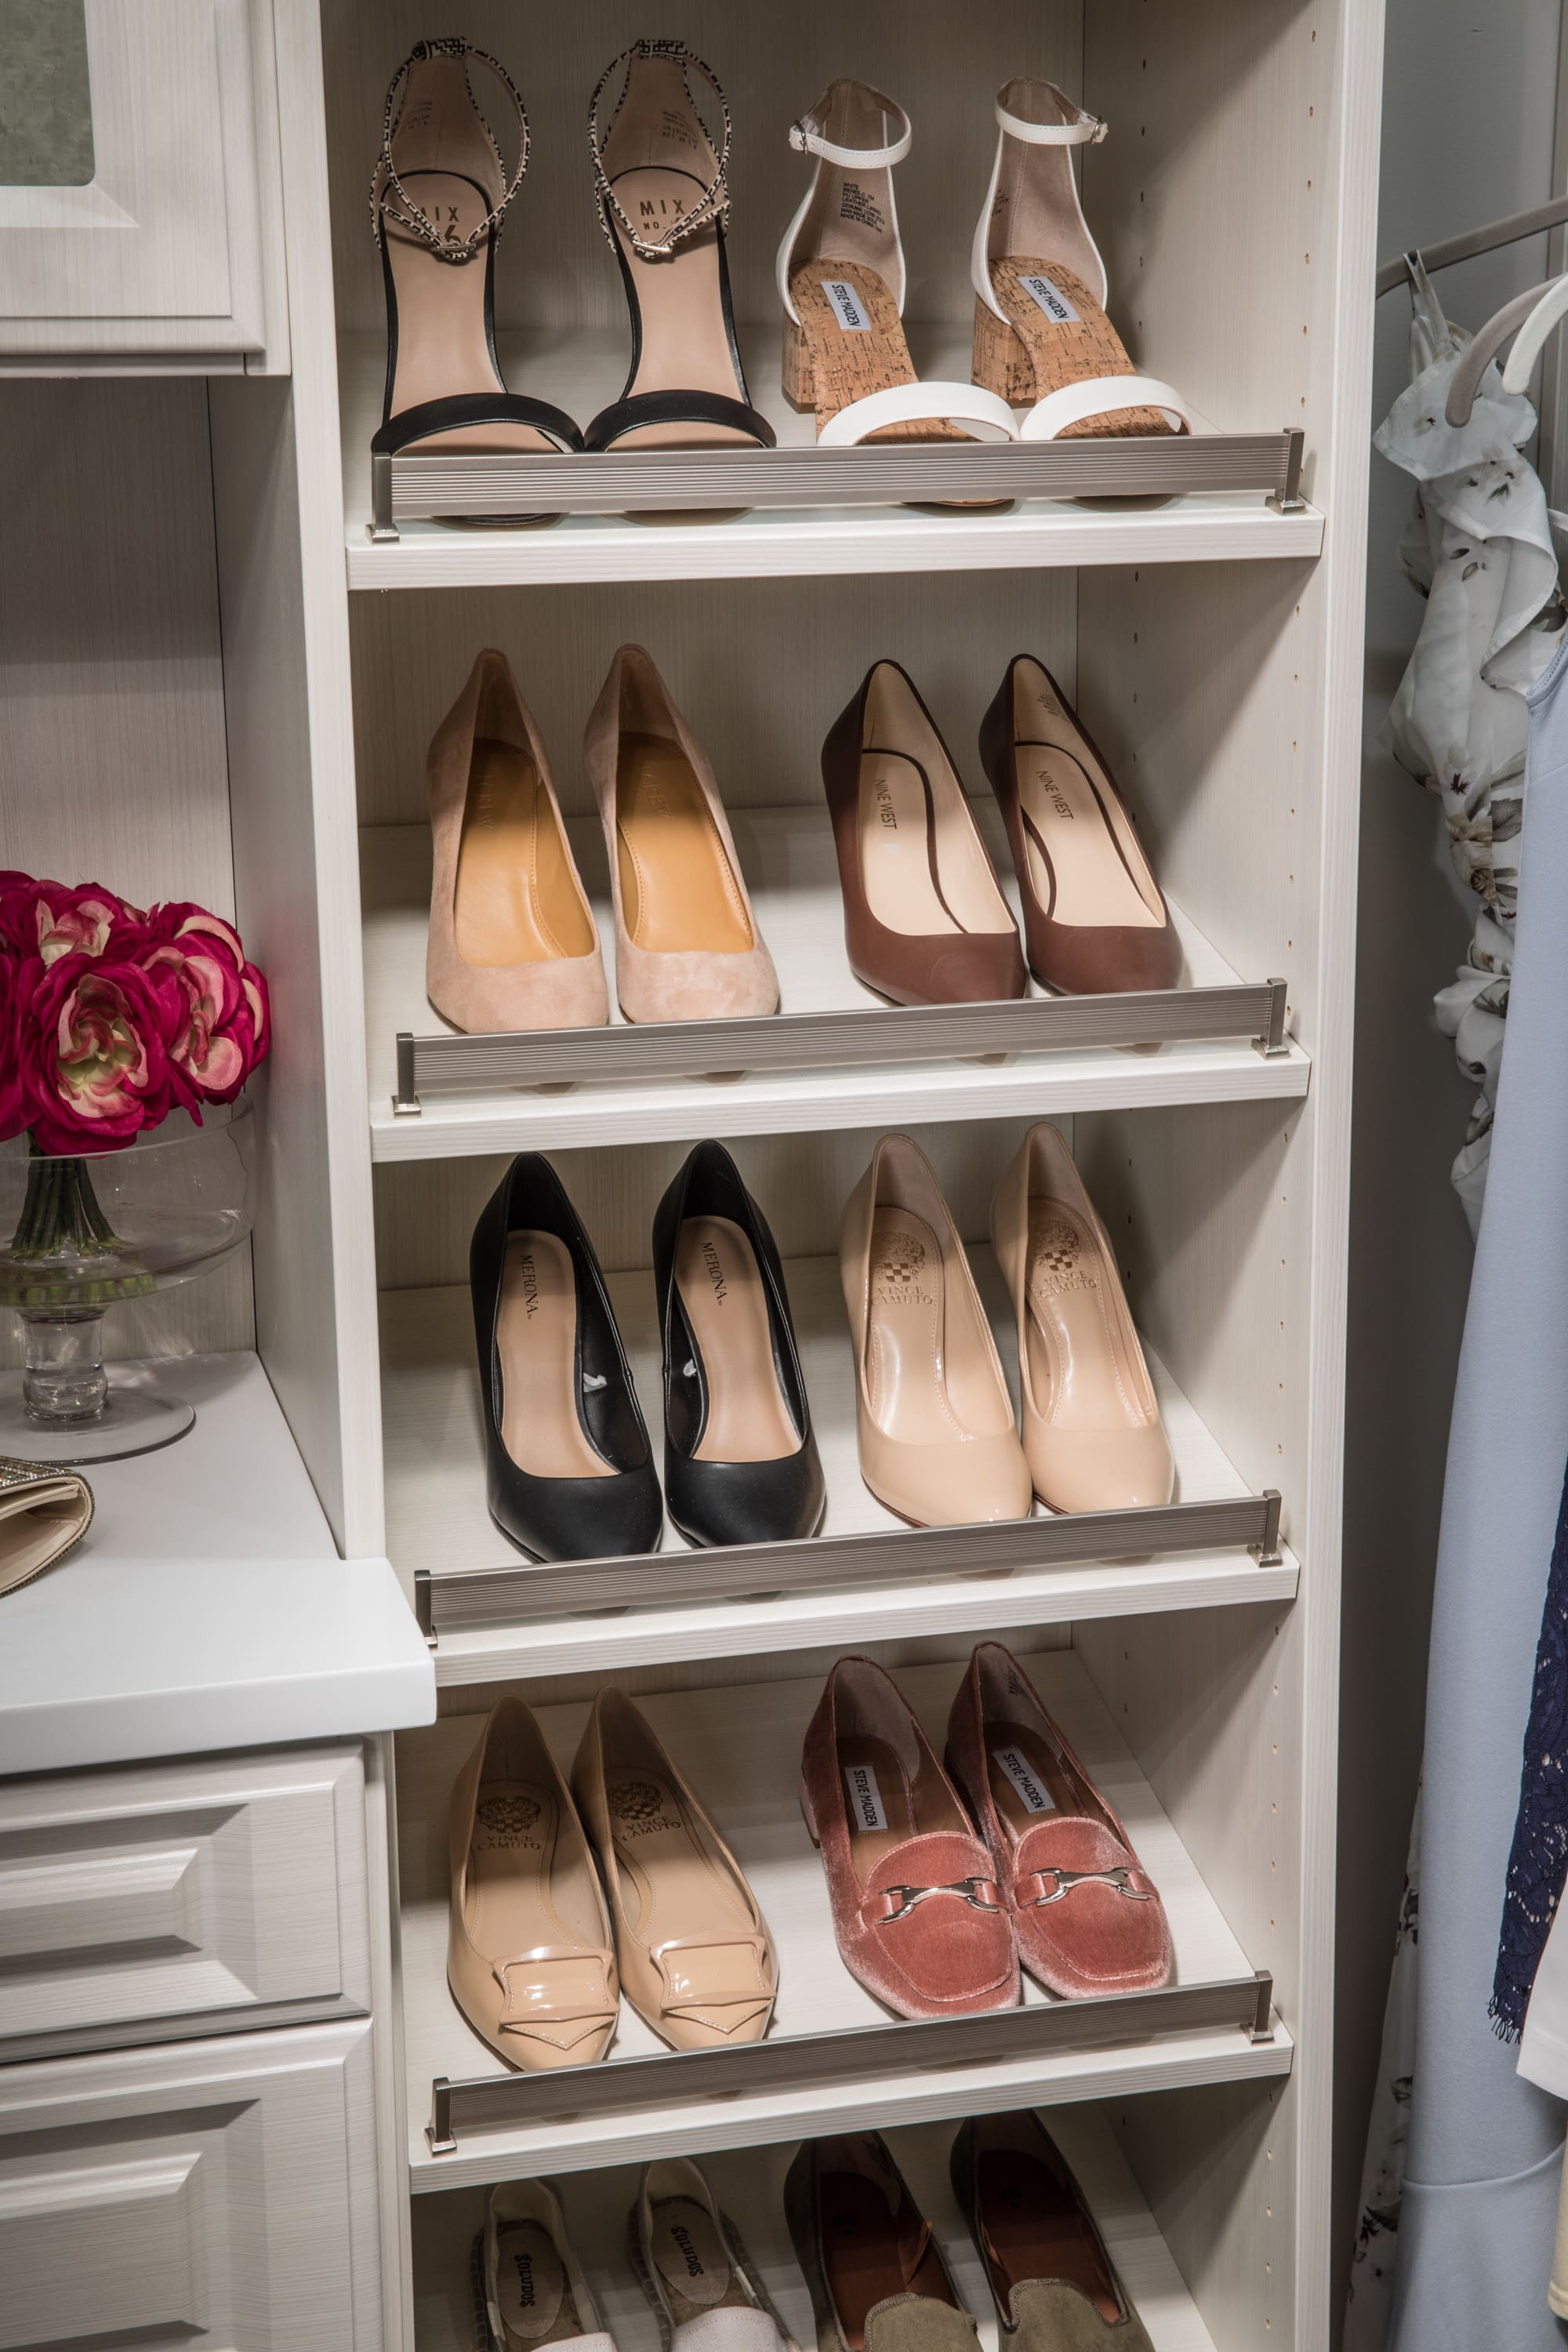 Shoes placed on shoe shelves